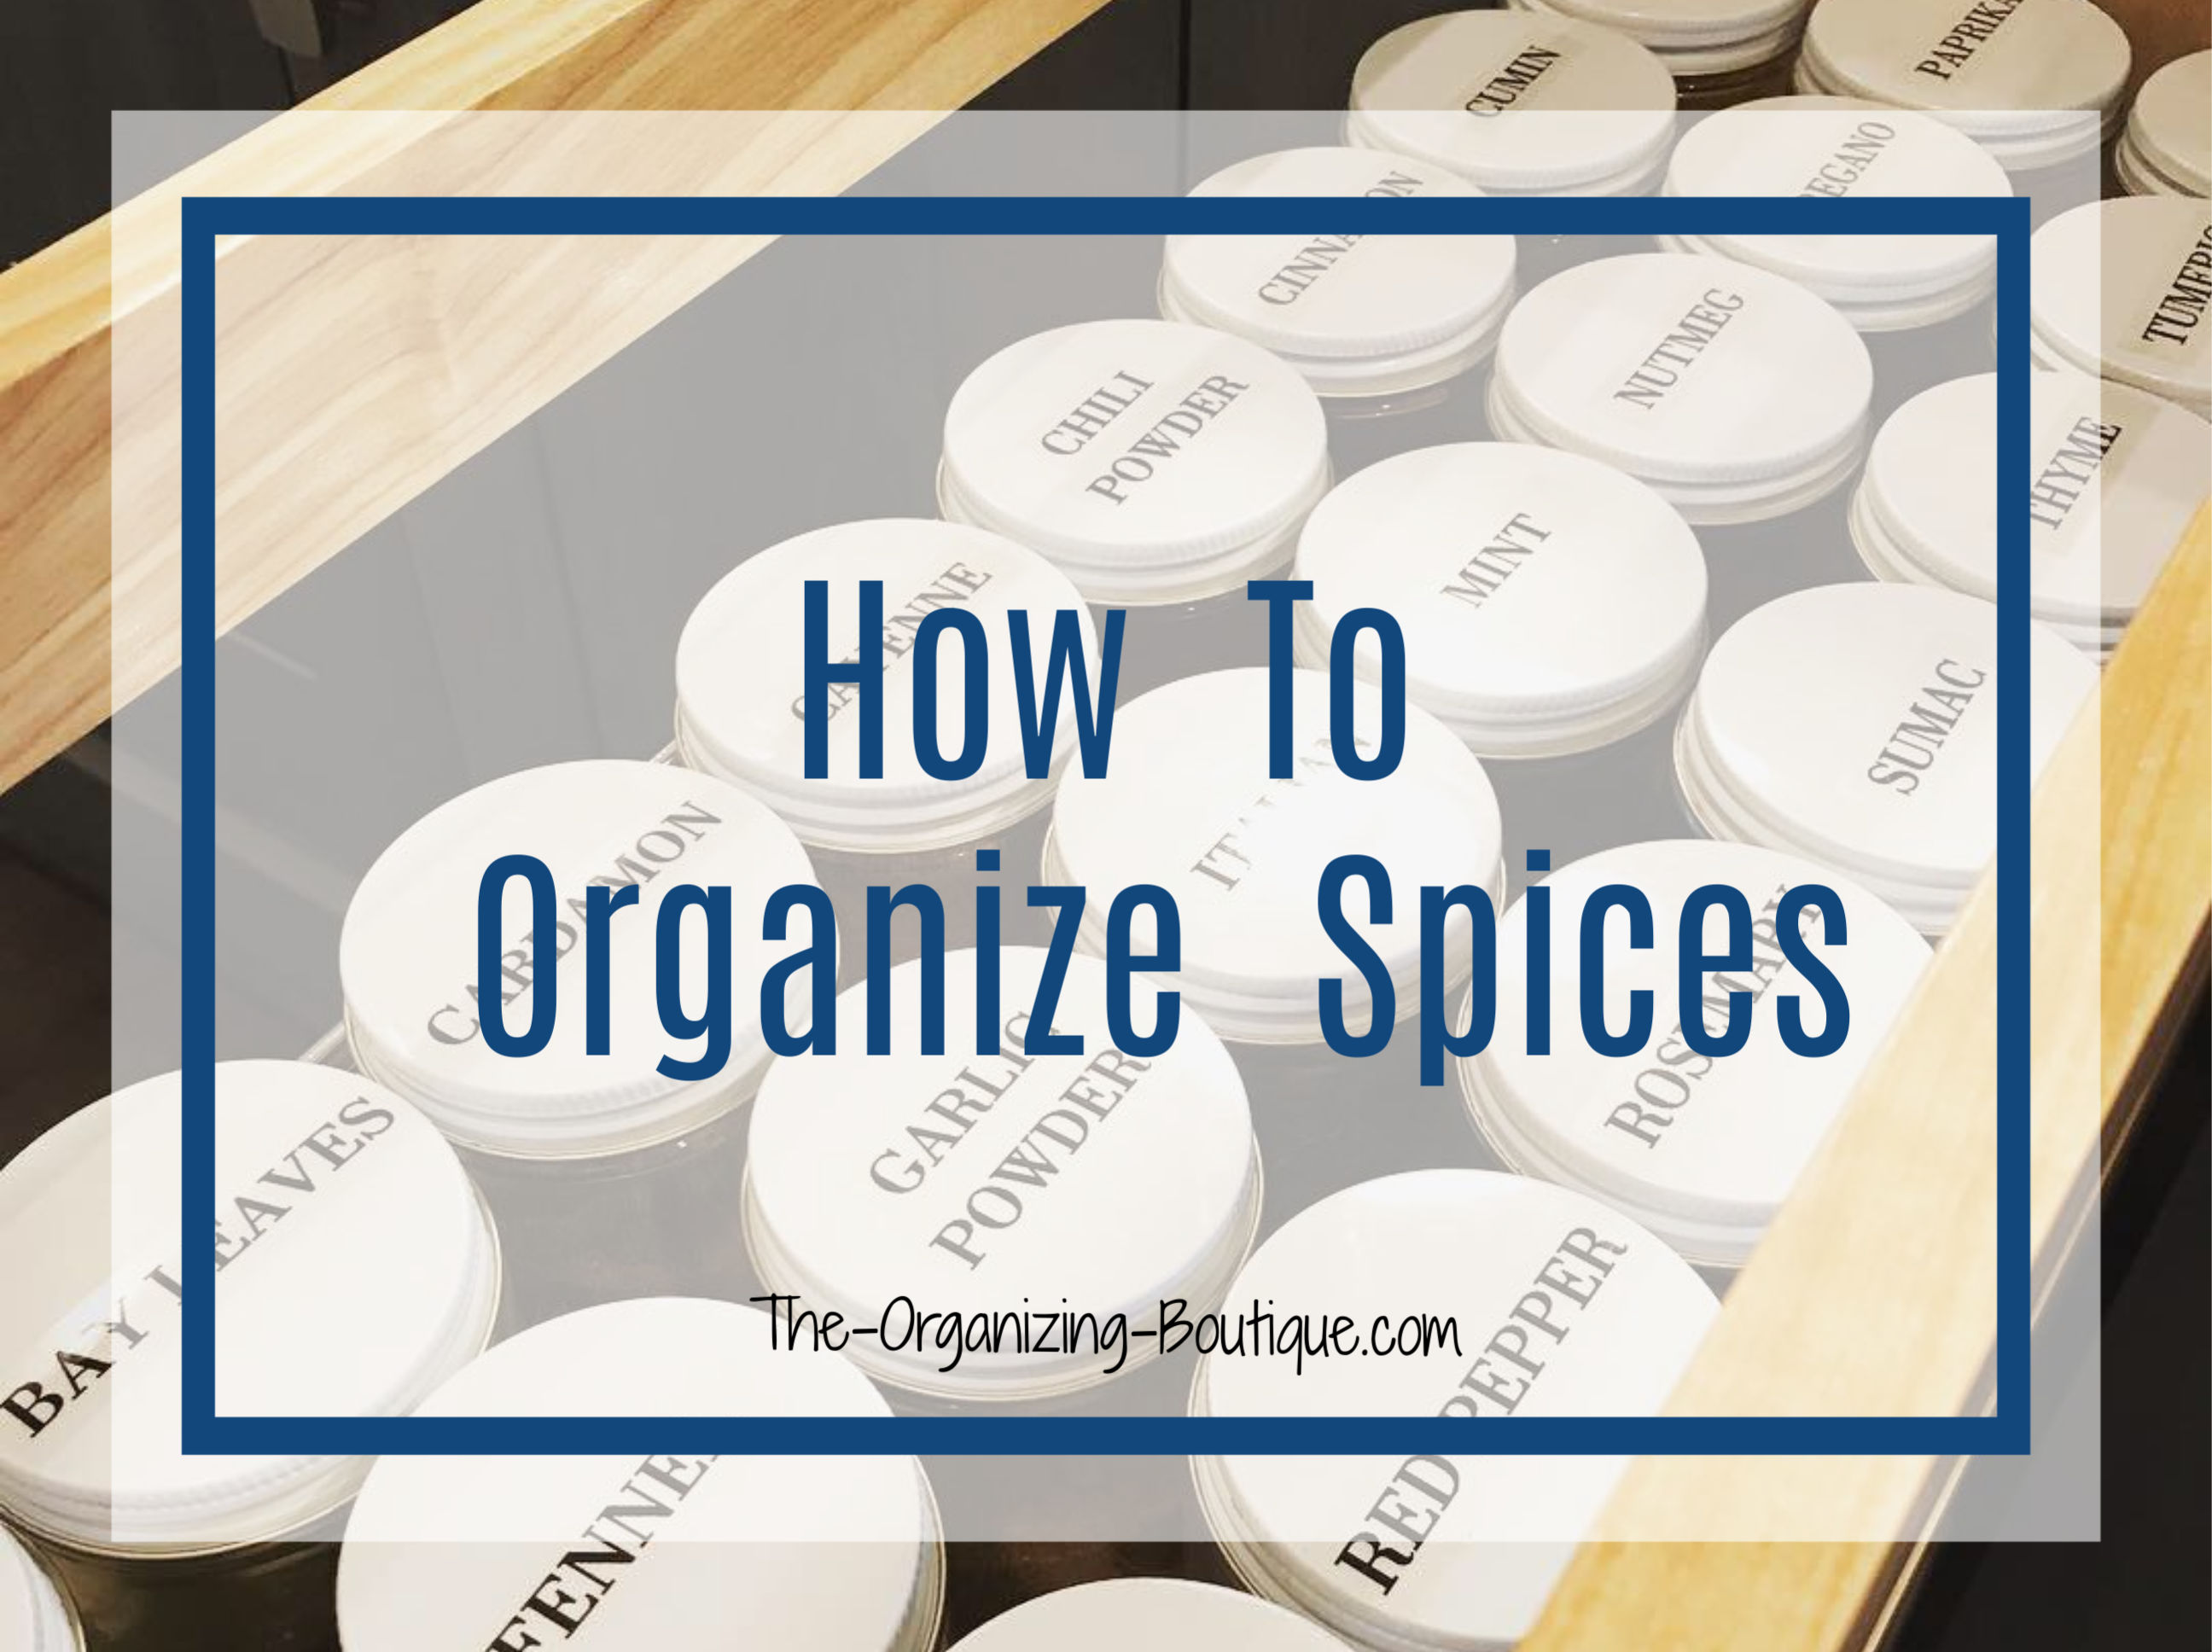 Do you have a drawer spice rack? Here's how I helped my client utilize hers.